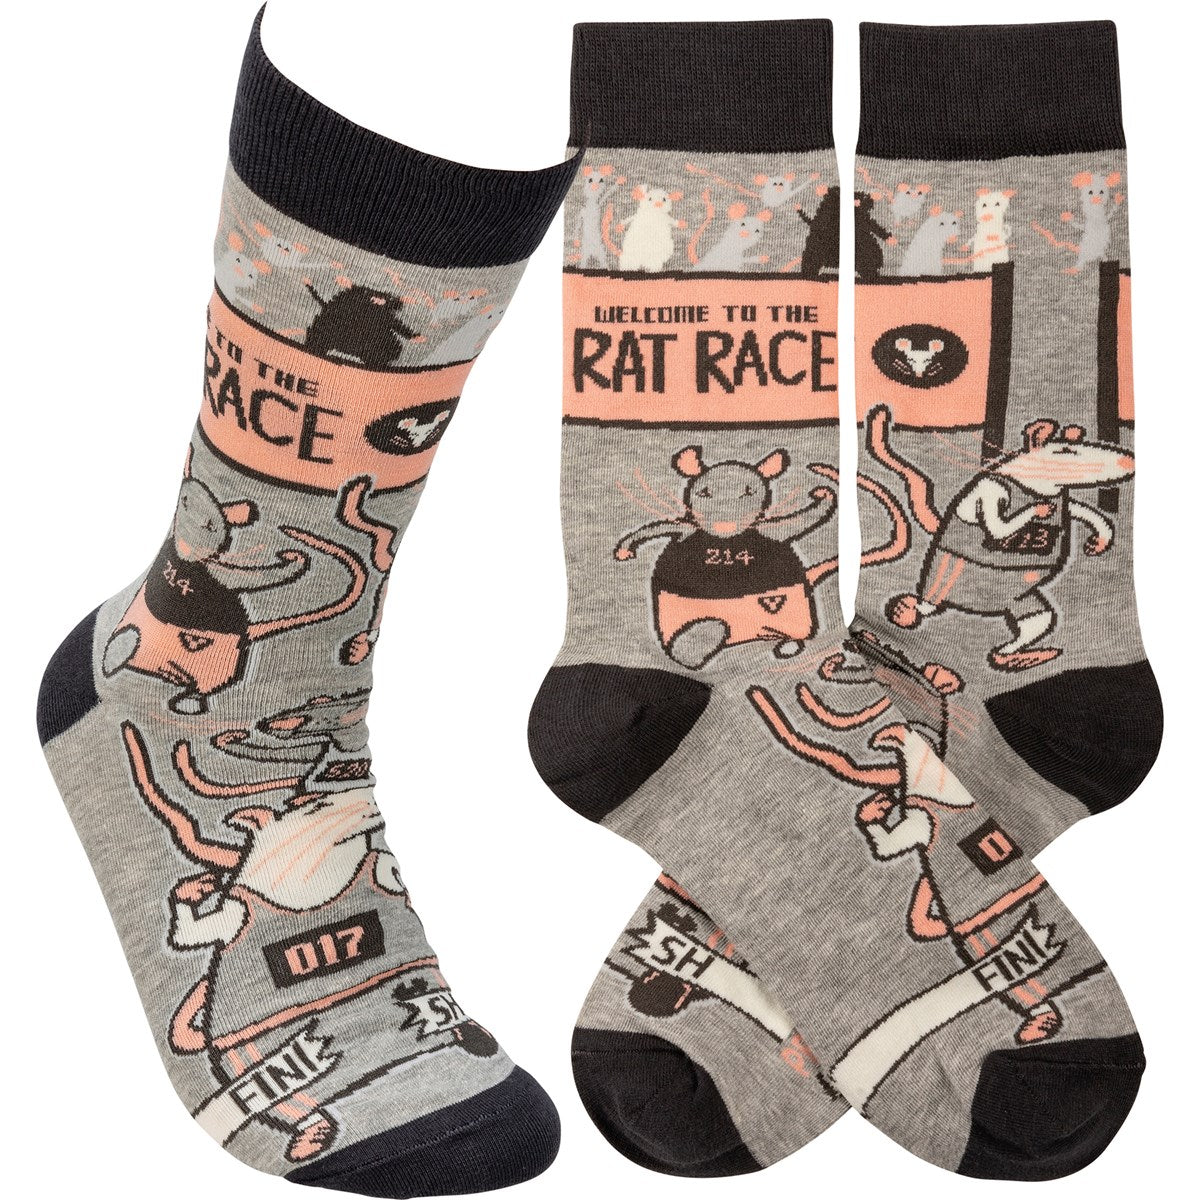 Gray and Black sock with Welcome to rat race